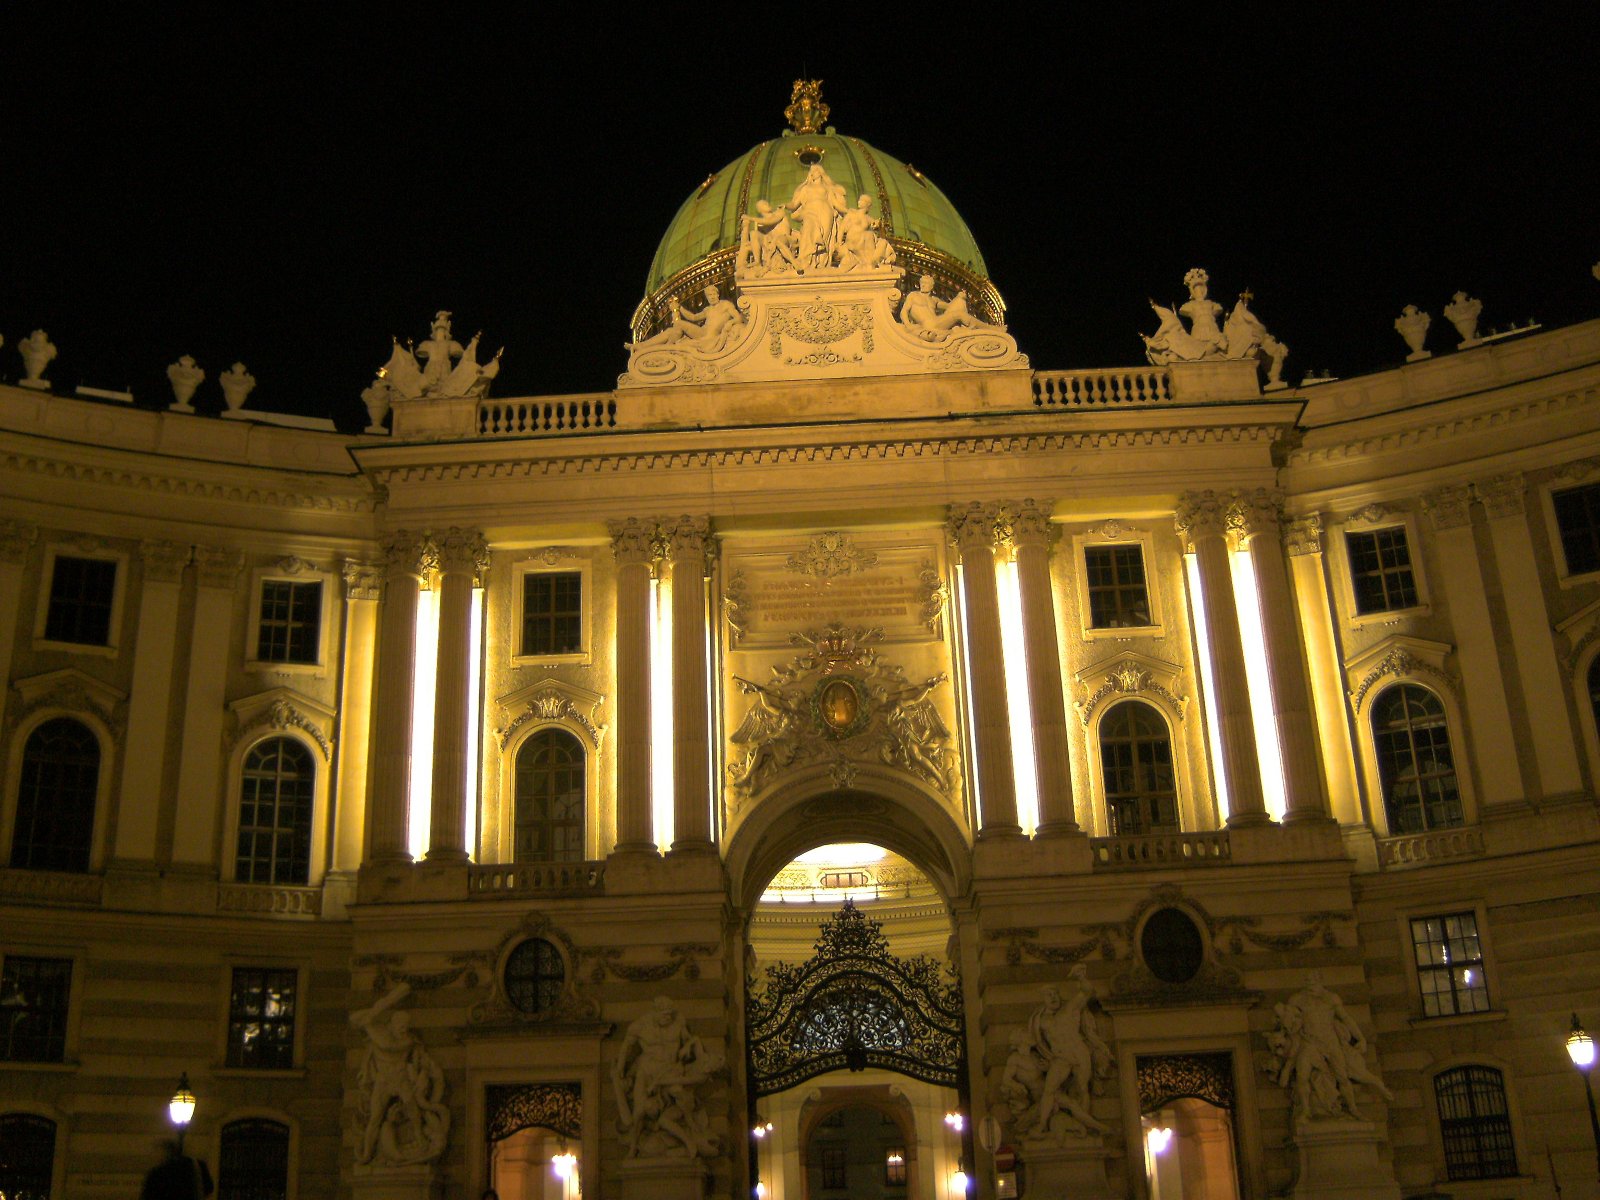 The Michaelertor is the "backdoor" of the Hofburg, the former residence of the emperor.